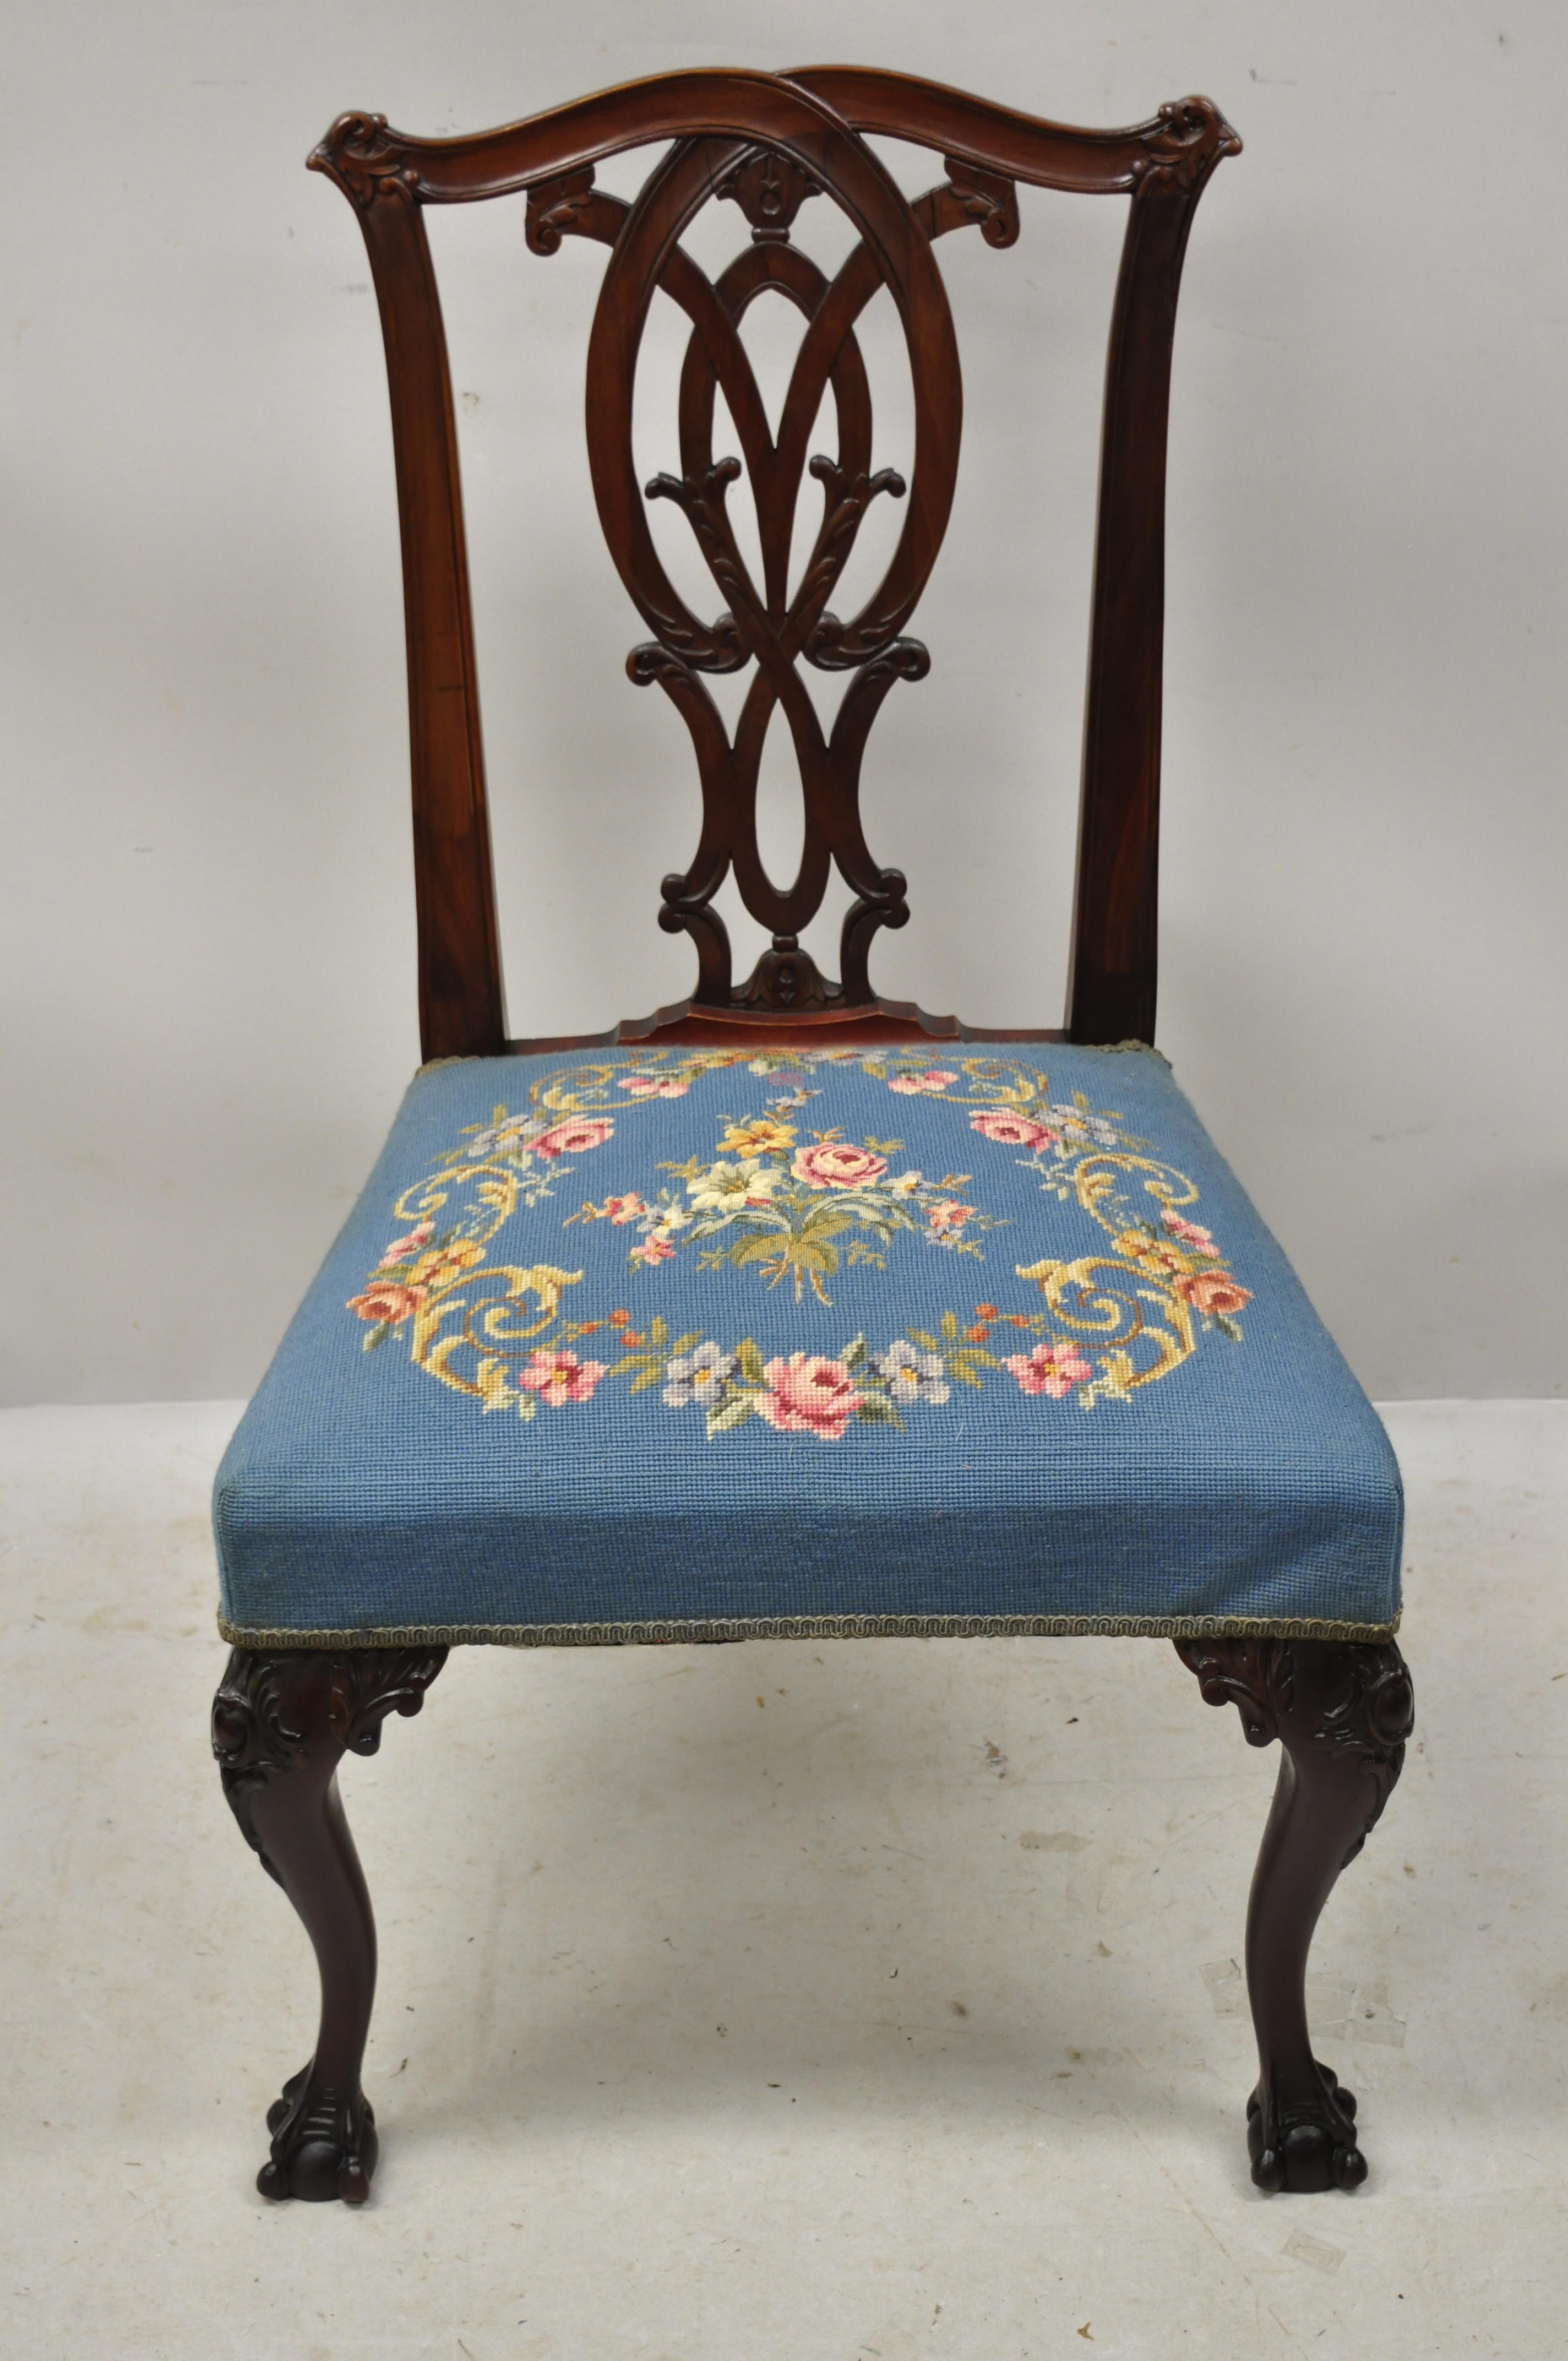 Antique Chippendale carved ball and claw mahogany dining side chair blue needlepoint seat. Item features a bell flower and leafy accent carved backsplat, blue needlepoint floral seat, solid wood frame, nicely carved details, carved ball and claw